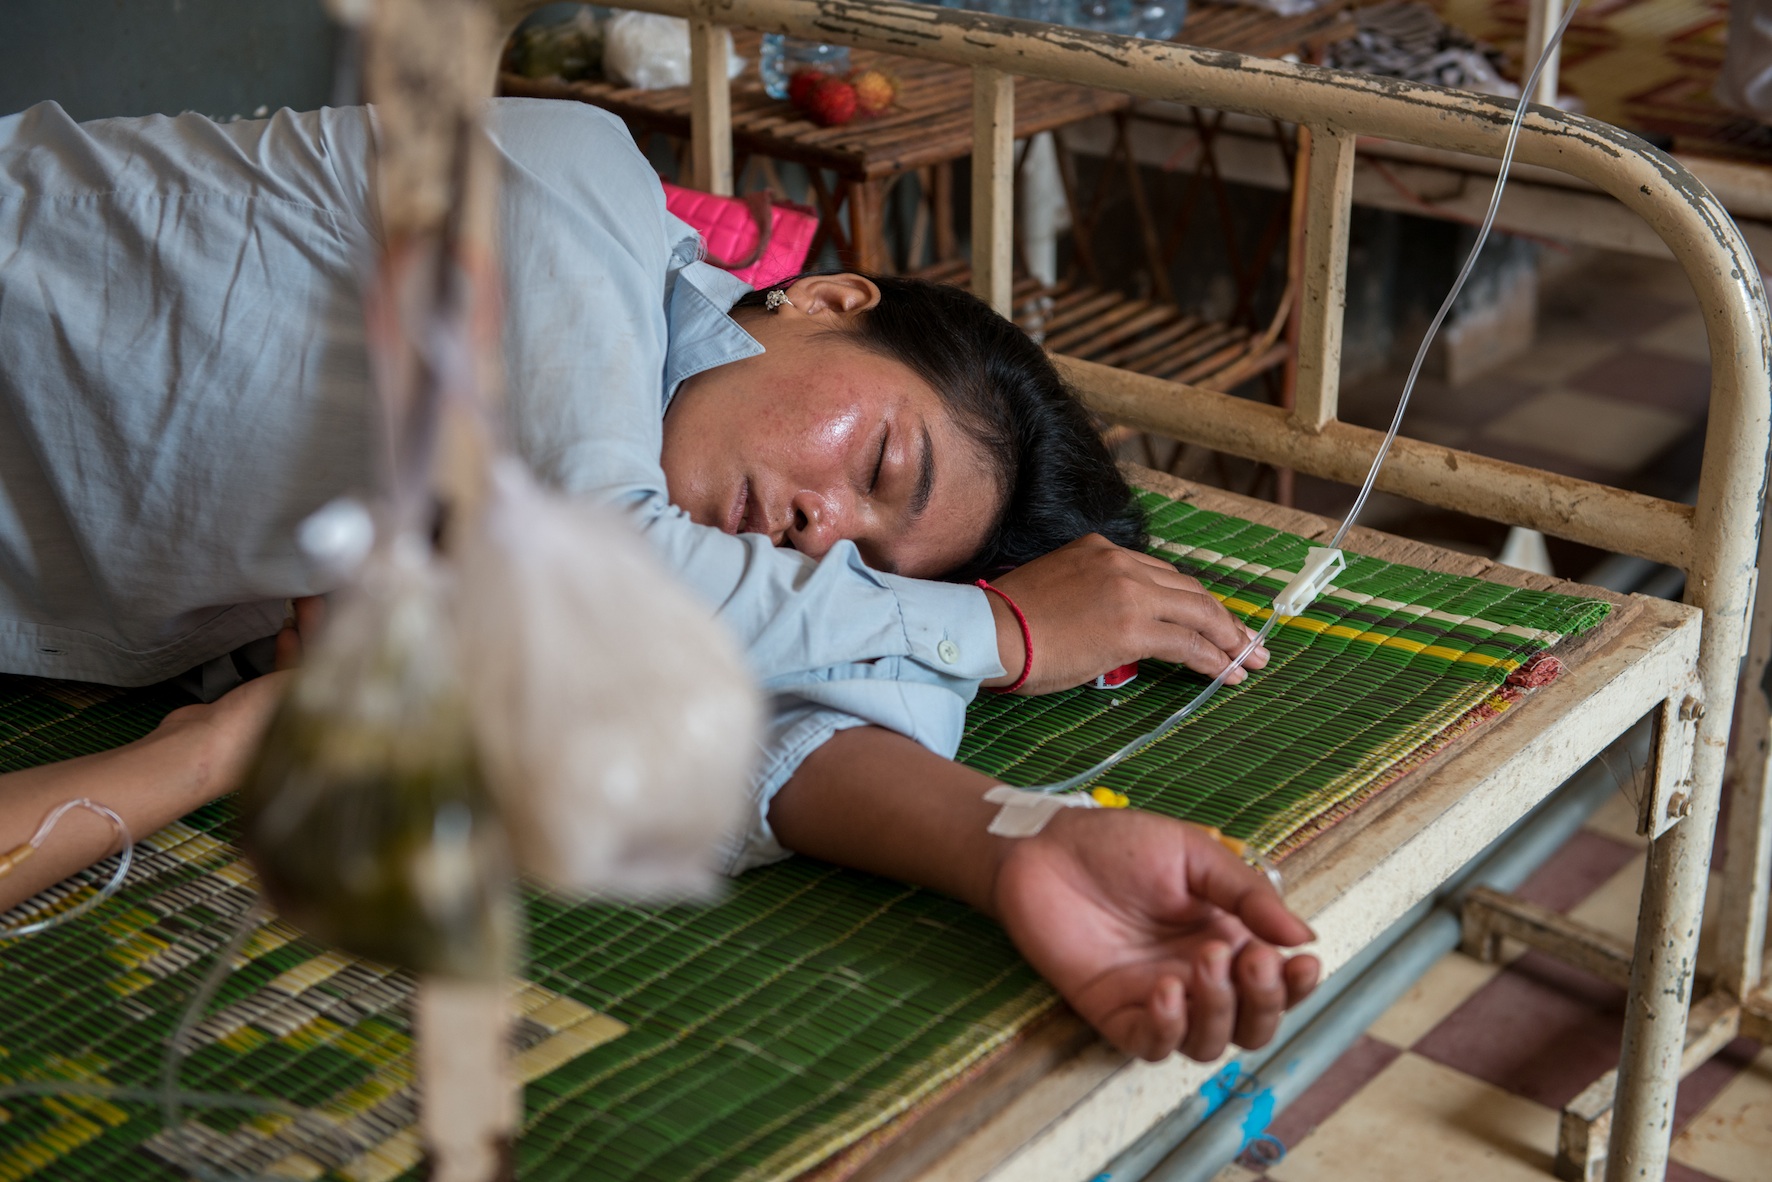 Cambodian garment workers toiling to death | IndustriALL